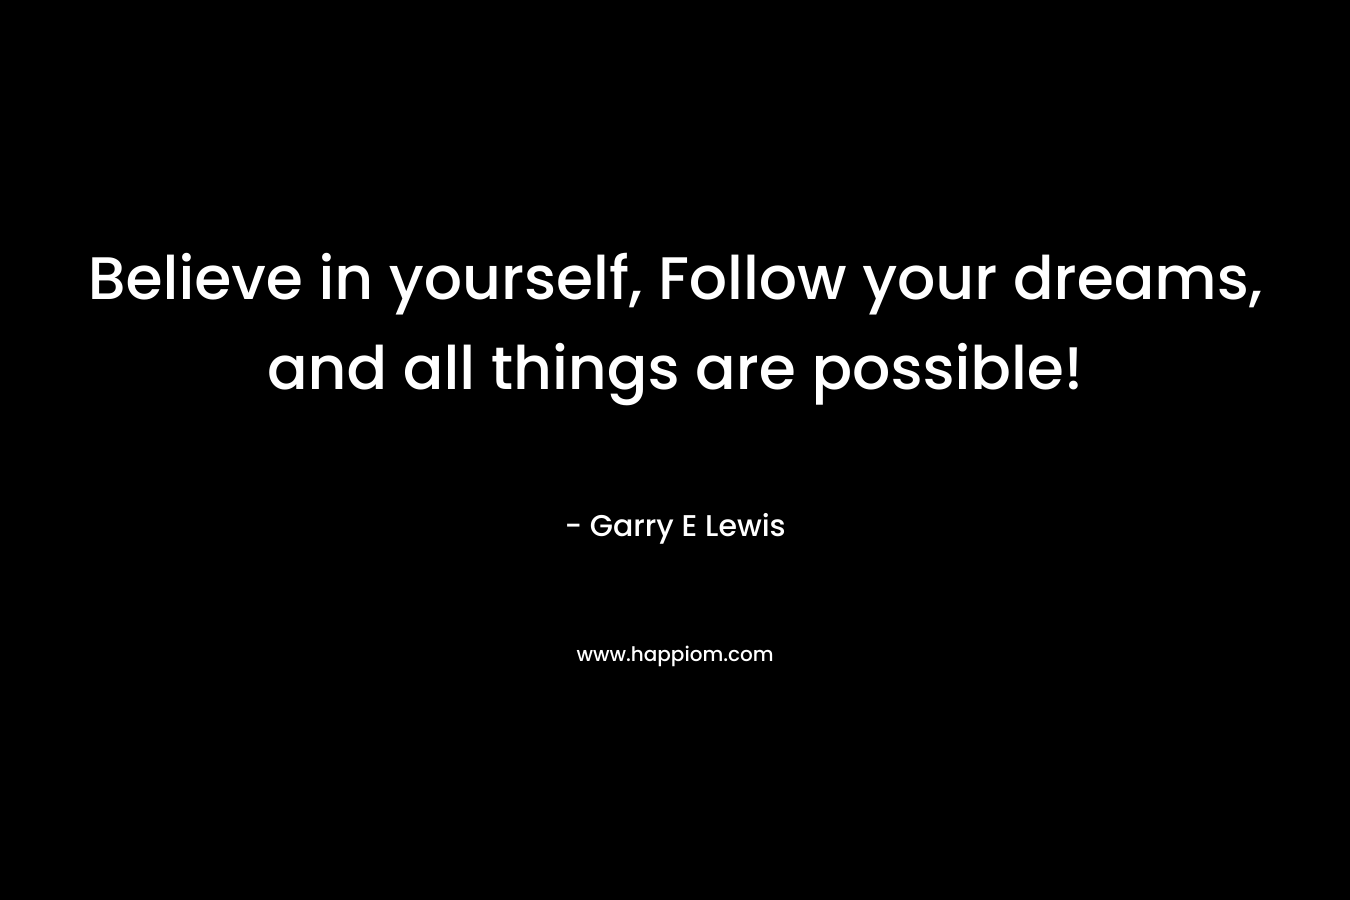 Believe in yourself, Follow your dreams, and all things are possible!